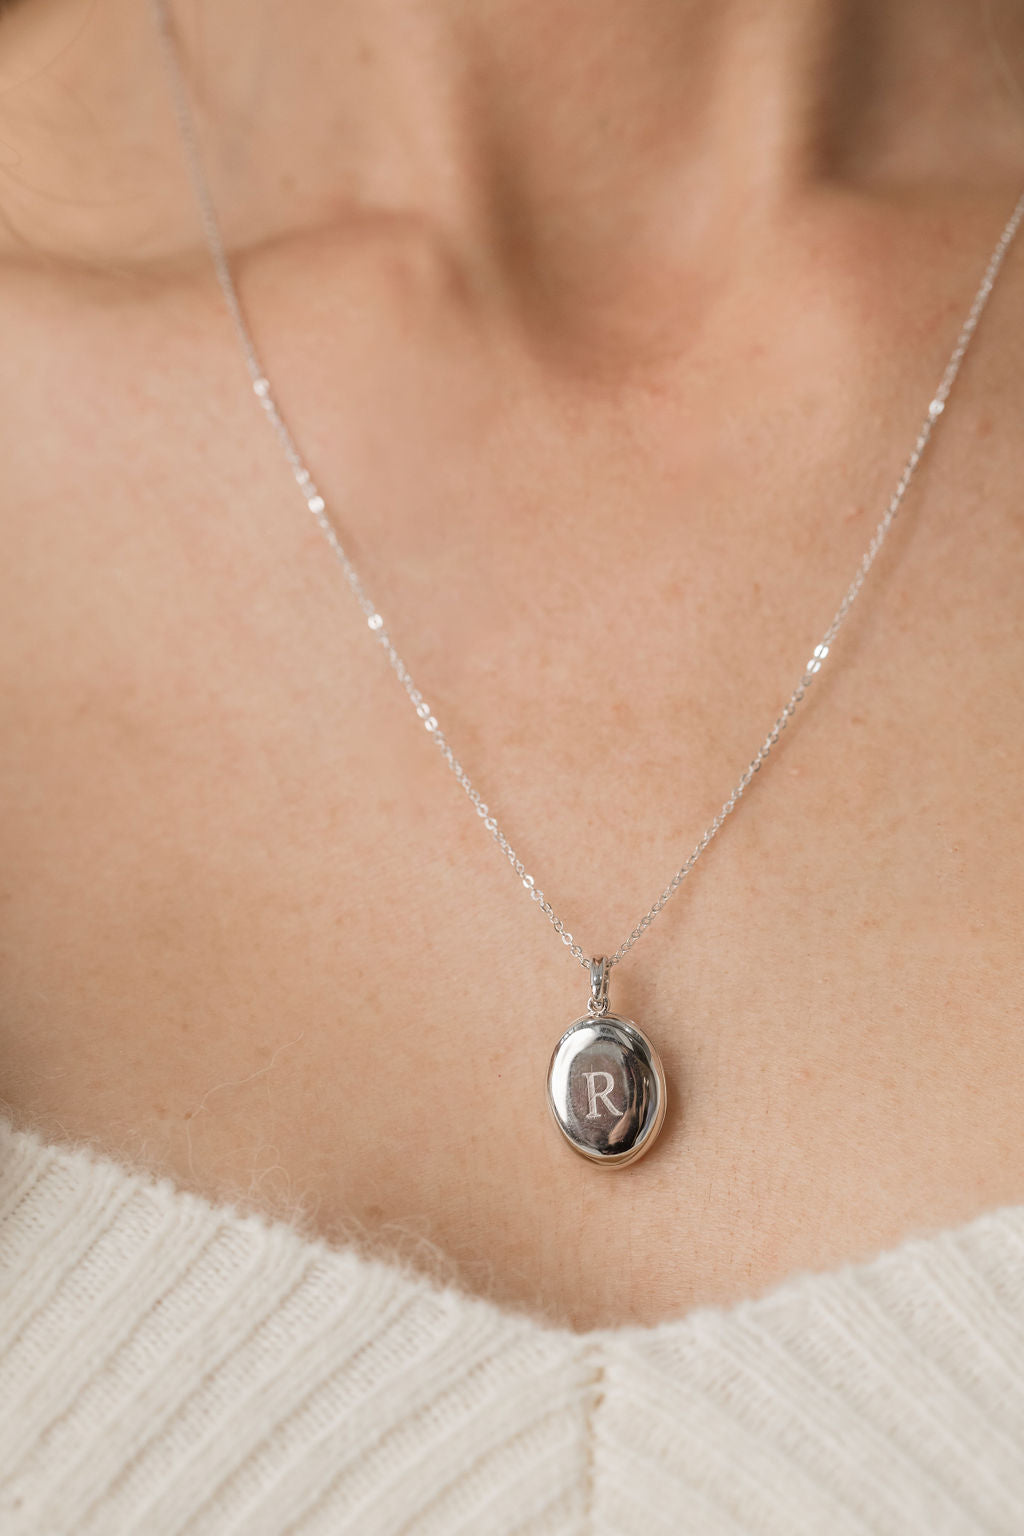 silver oval locket engraved on chain